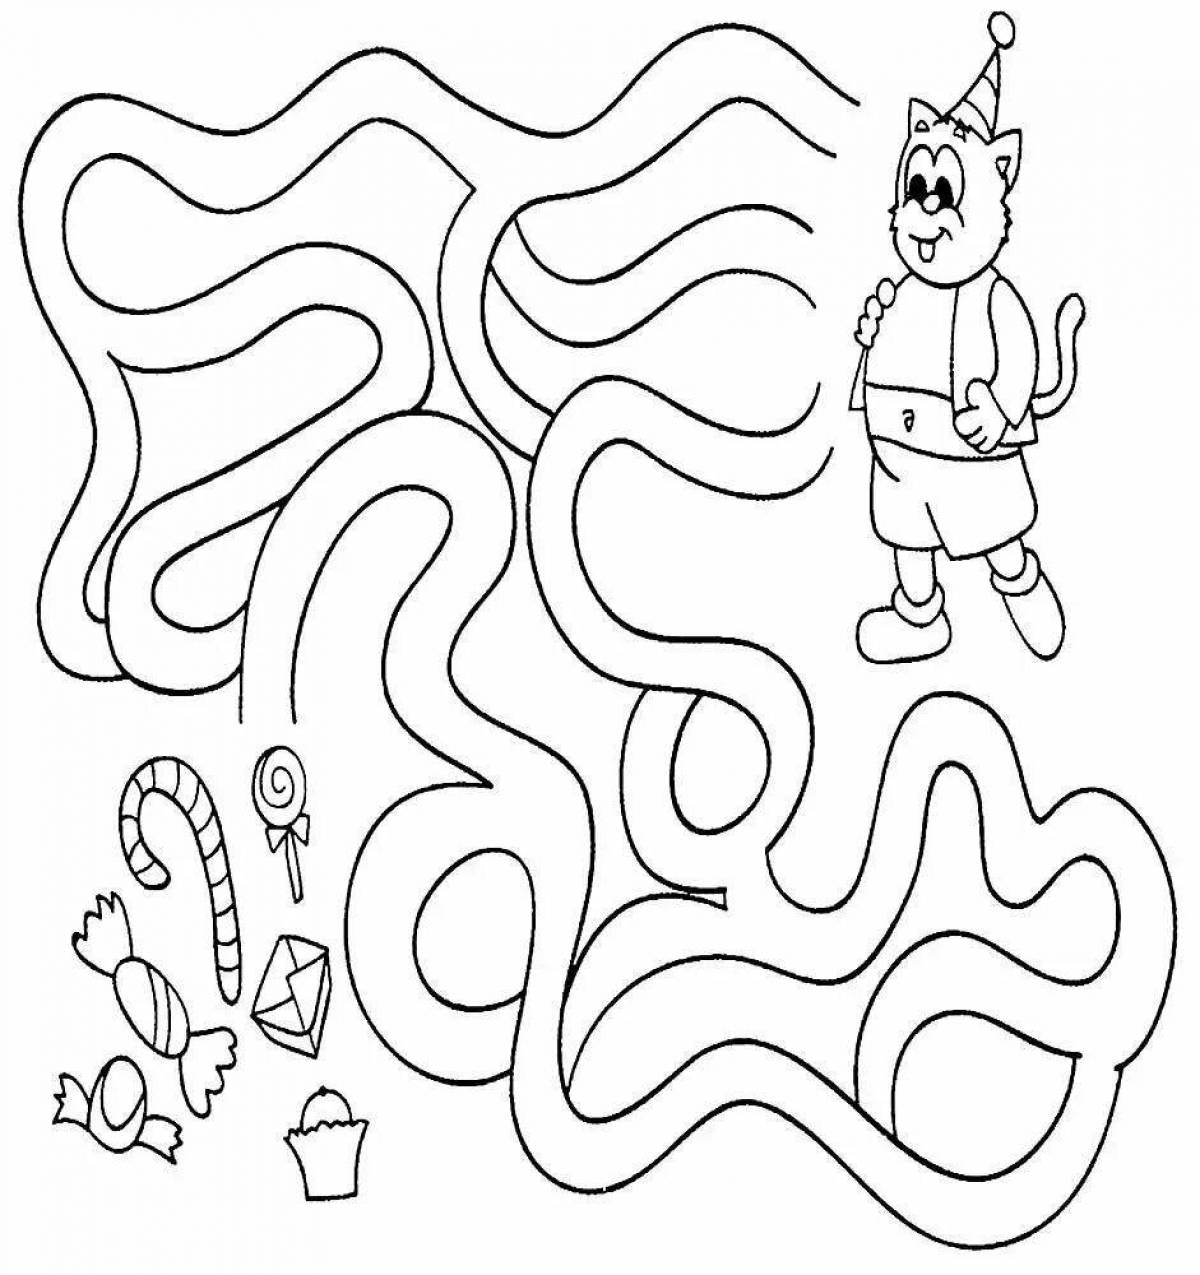 Mazes for children 4 5 years old #13